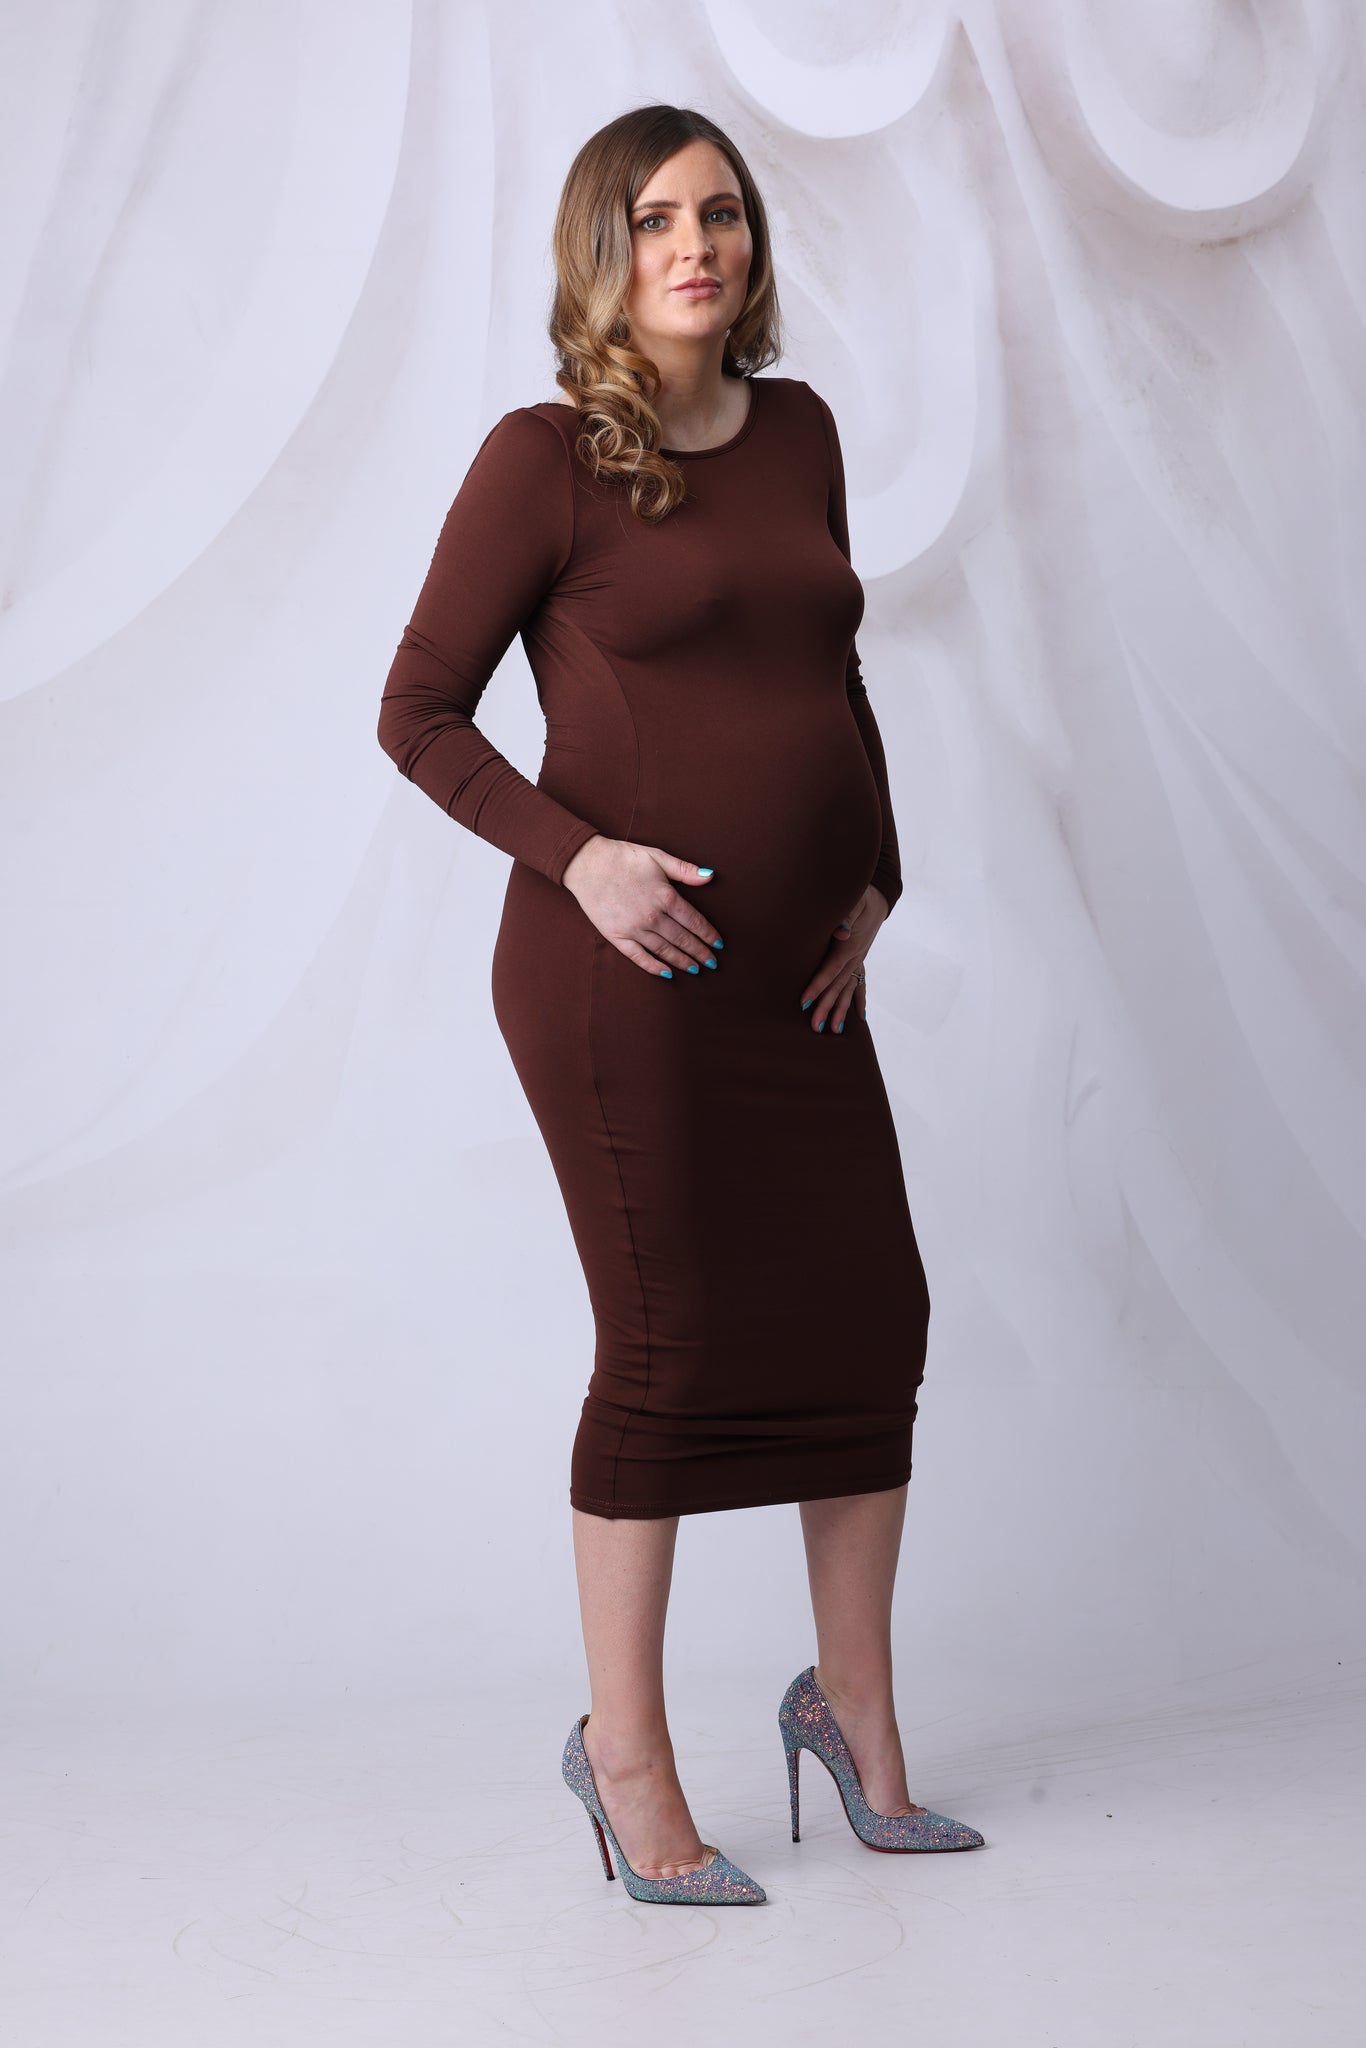 Maternity Backless Midi Dress in Chocolate Brown or Black